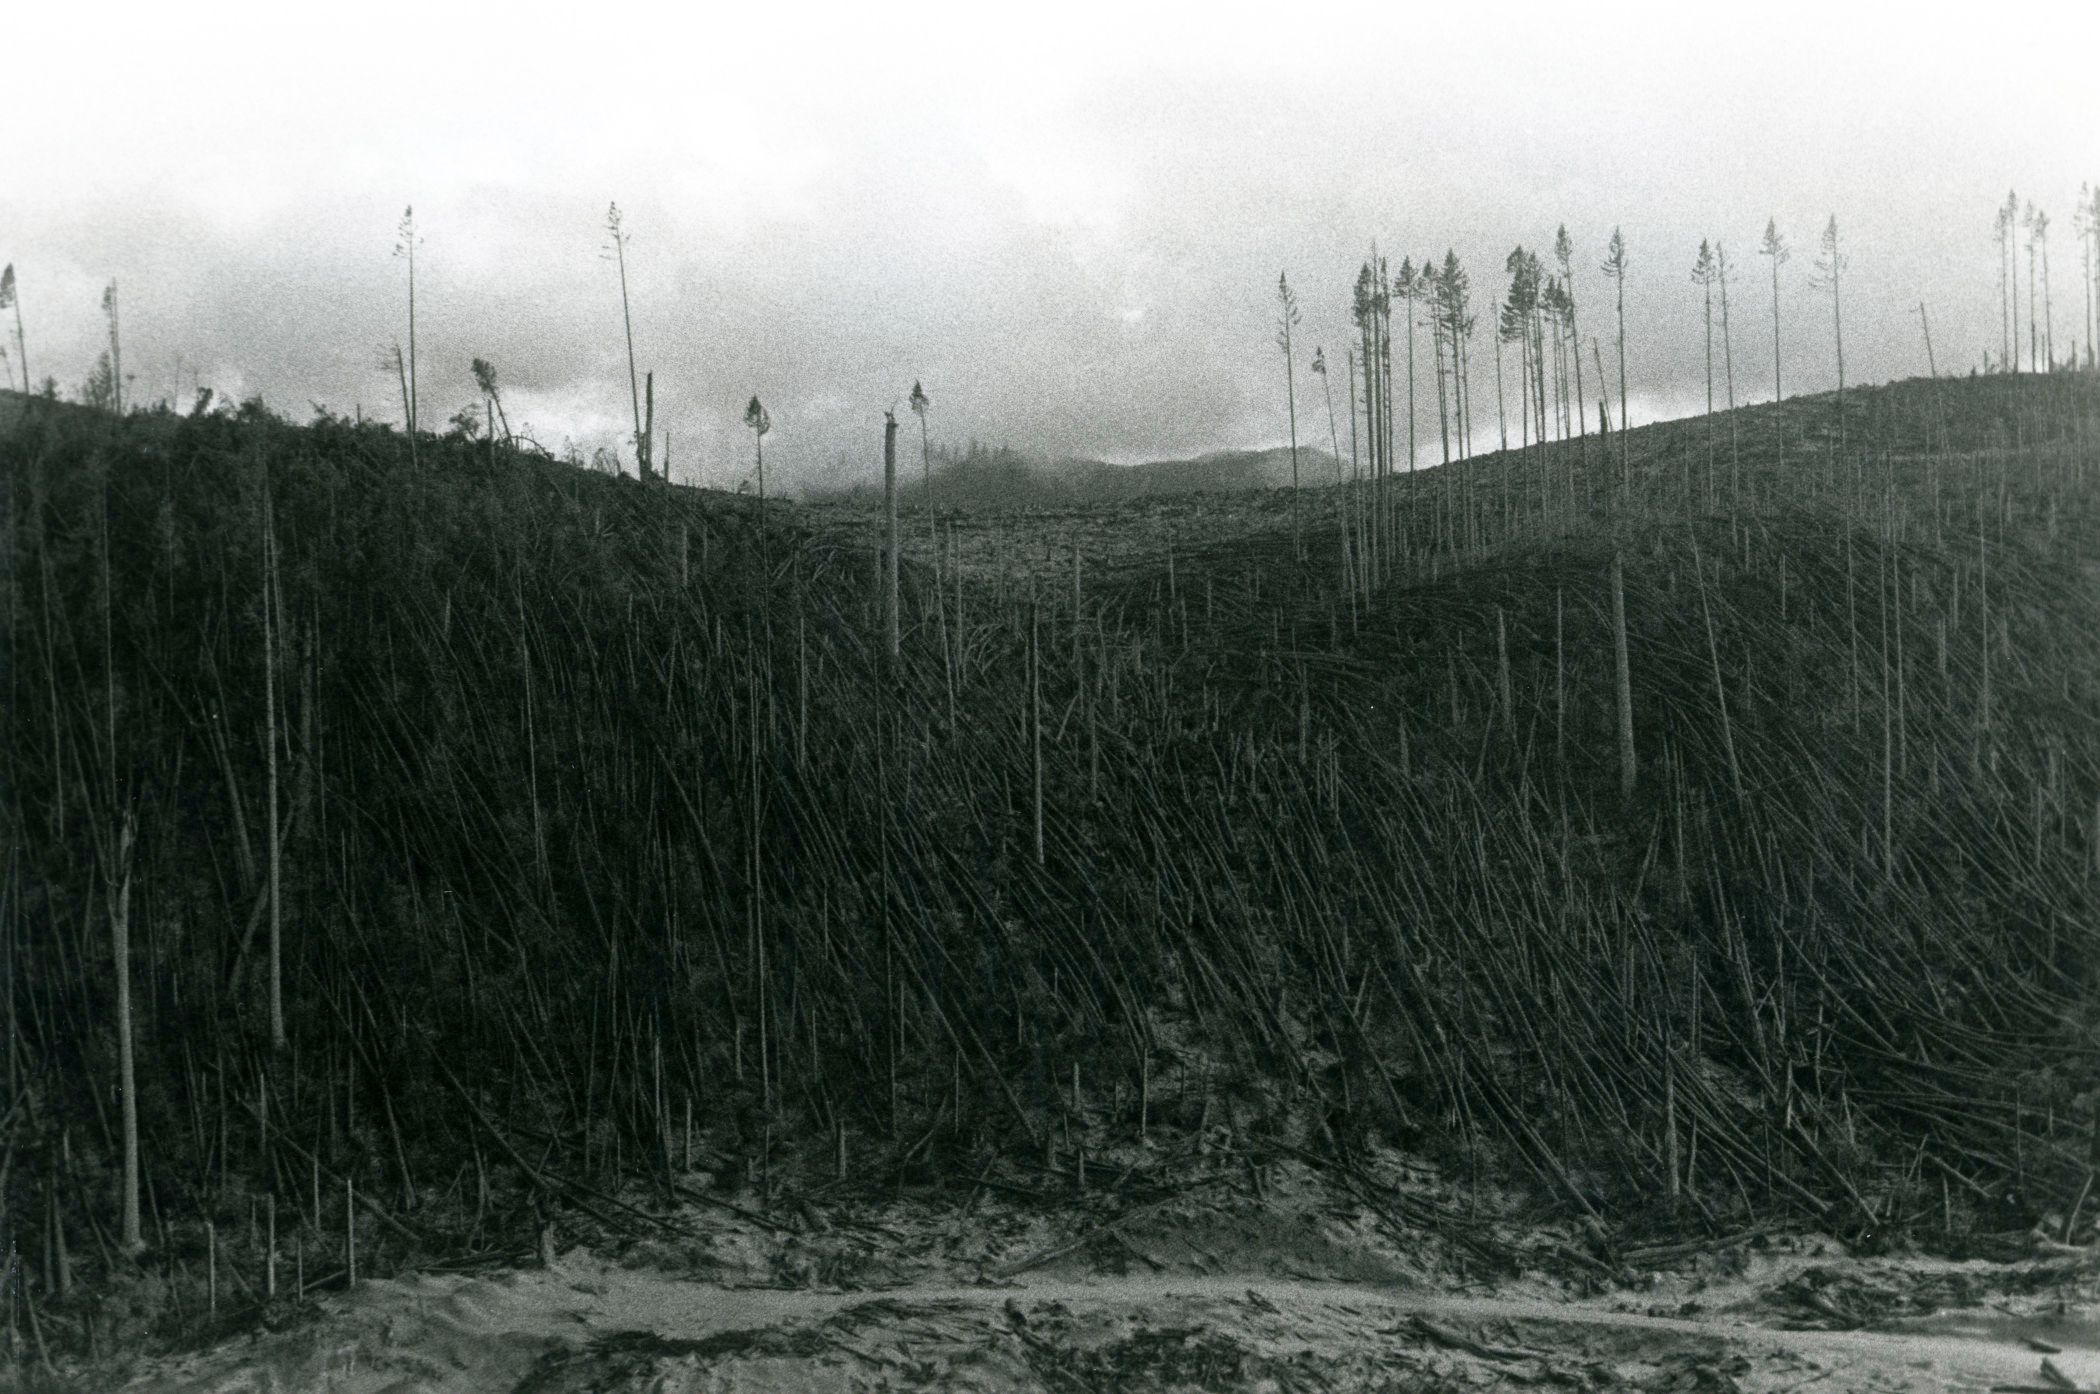 Weyerhaeuser Company land in the Mount St. Helens' area after the volcano eruption of 1980.